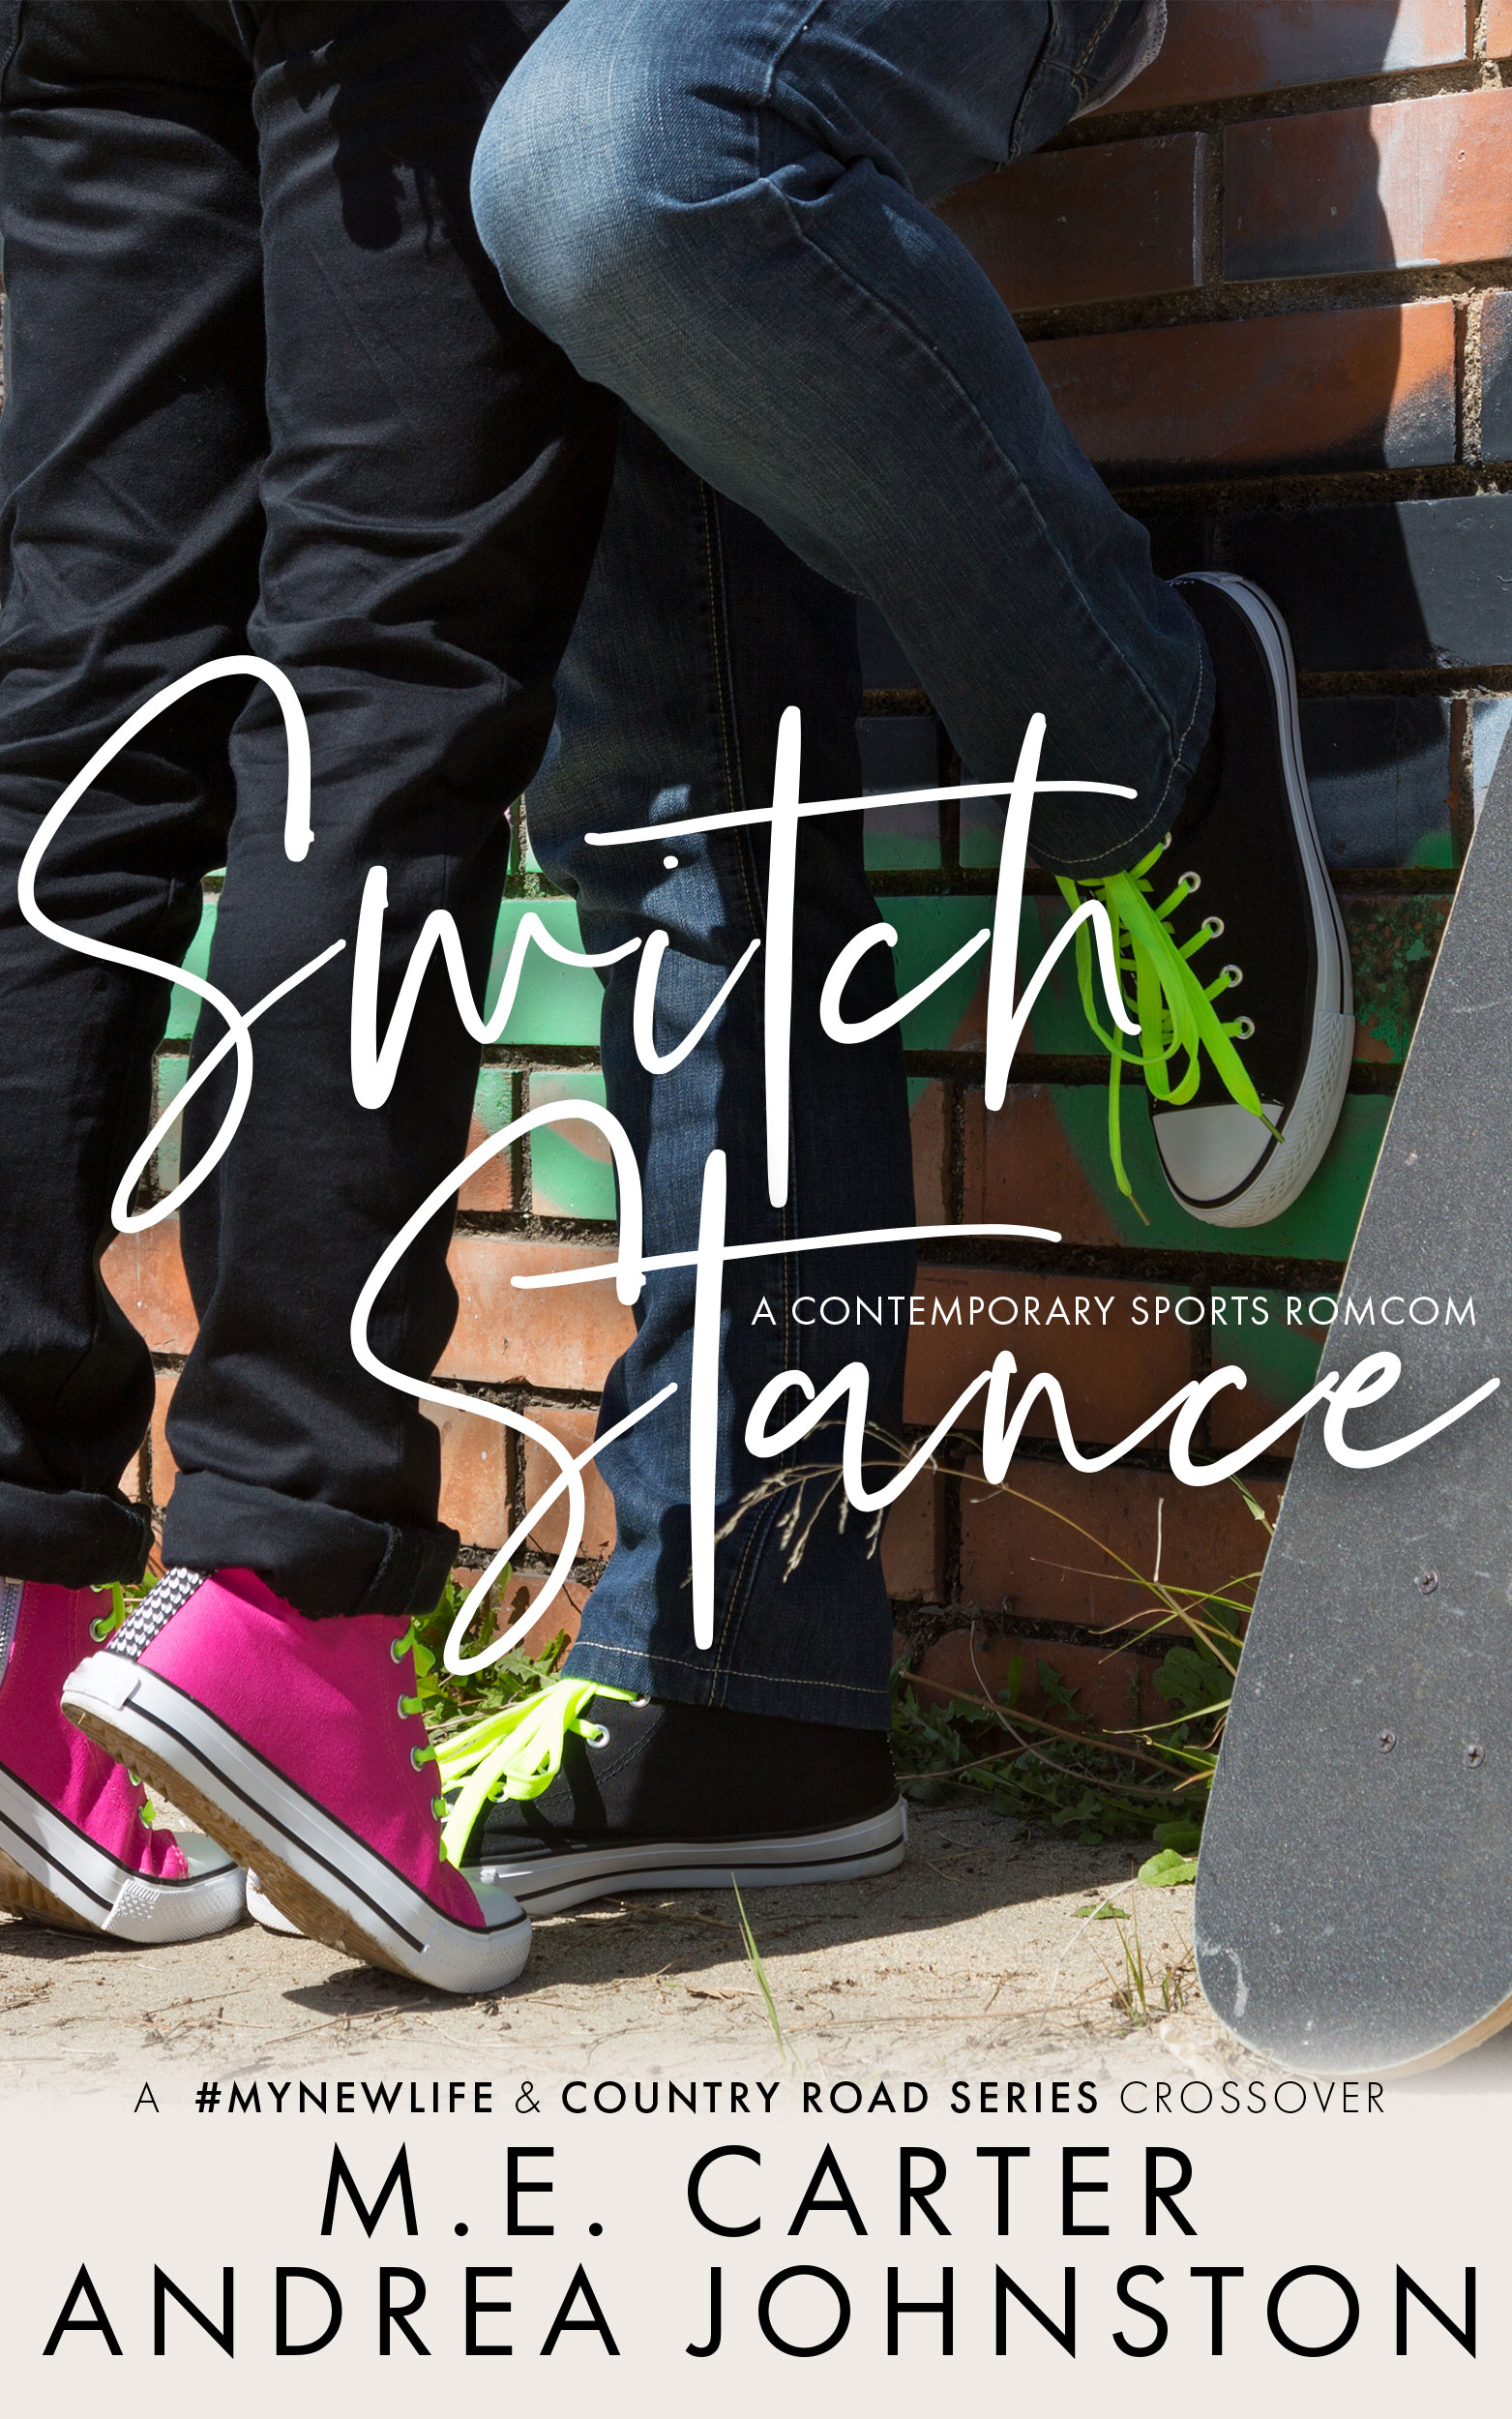 Switch Stance by M.E. Carter and Andrea Johnston [Cover Reveal]